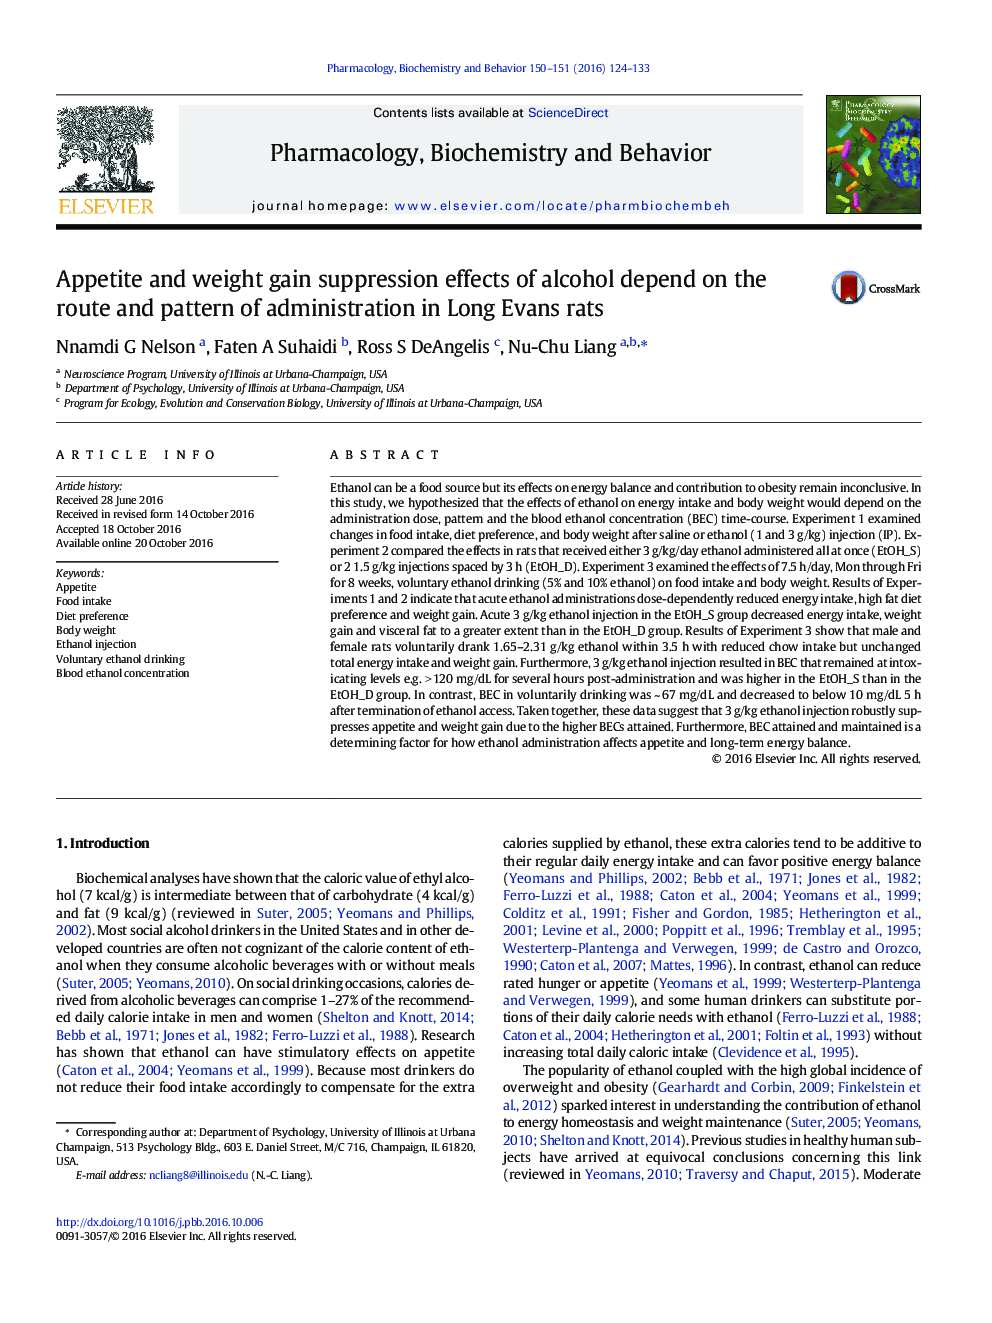 Appetite and weight gain suppression effects of alcohol depend on the route and pattern of administration in Long Evans rats